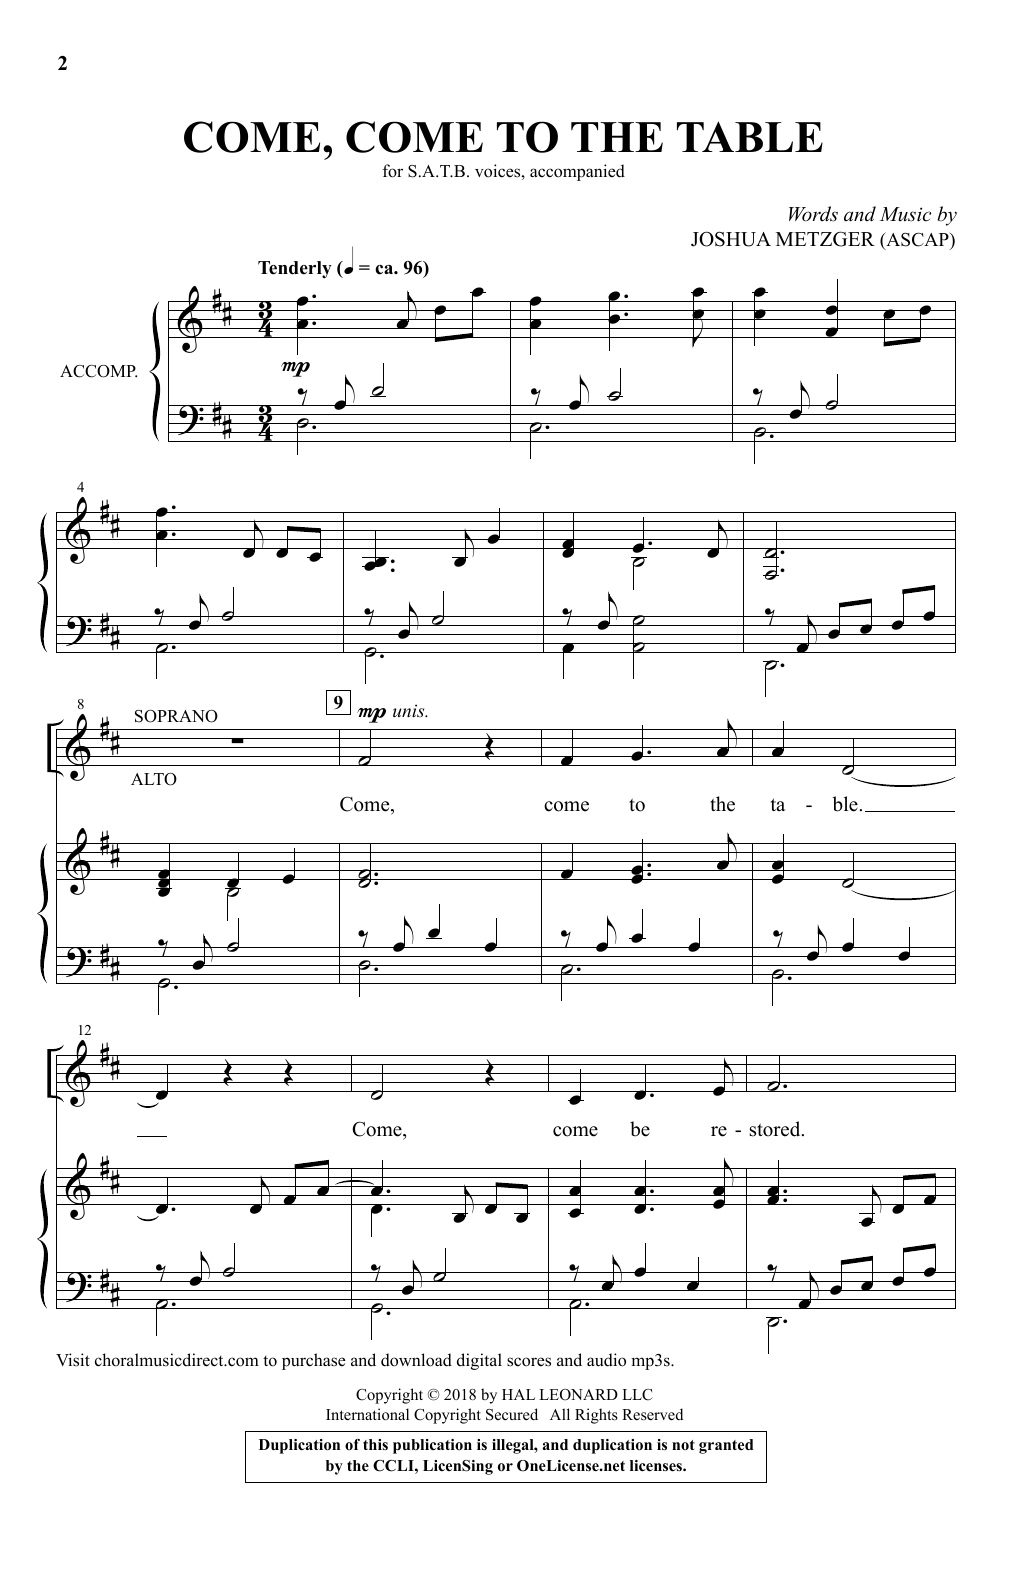 Download Joshua Metzger Come, Come To The Table Sheet Music